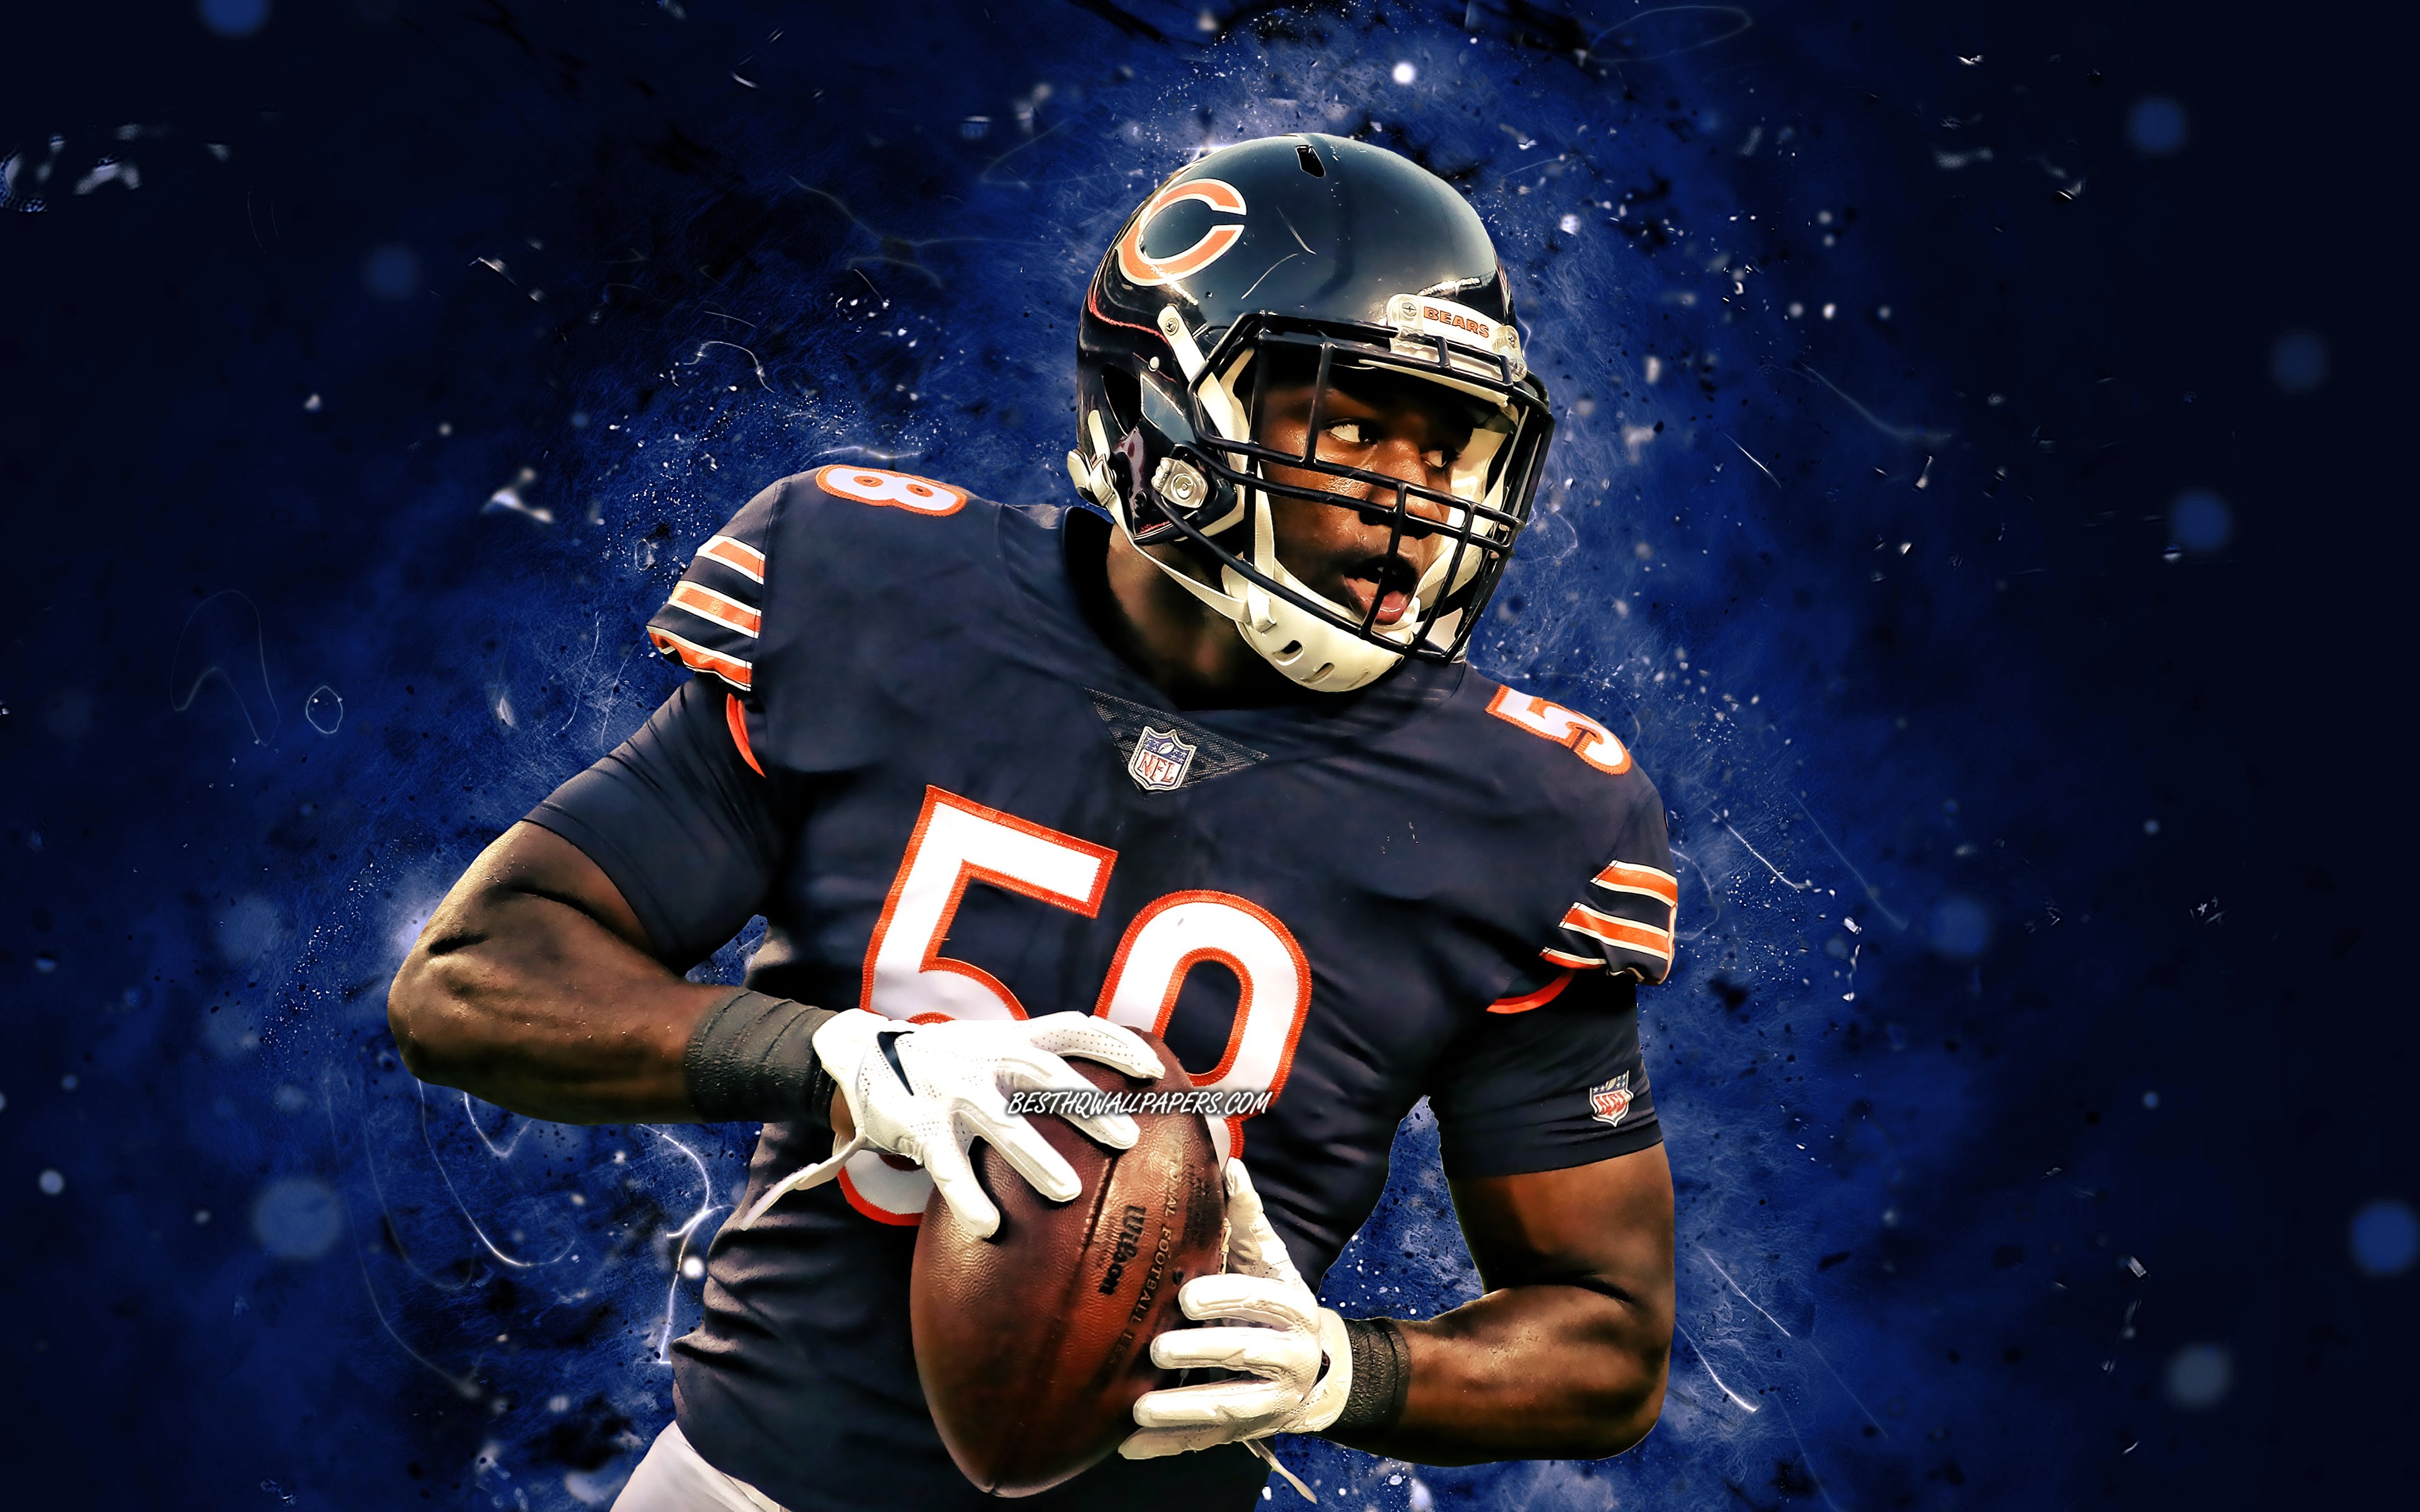 Download wallpaper Roquan Smith, 4k, linebacker, Chicago Bears, american football, NFL, Roquan Daevon Smith, blue neon lights, Roquan Smith Chicago Bears, Roquan Smith 4K for desktop with resolution 3840x2400. High Quality HD